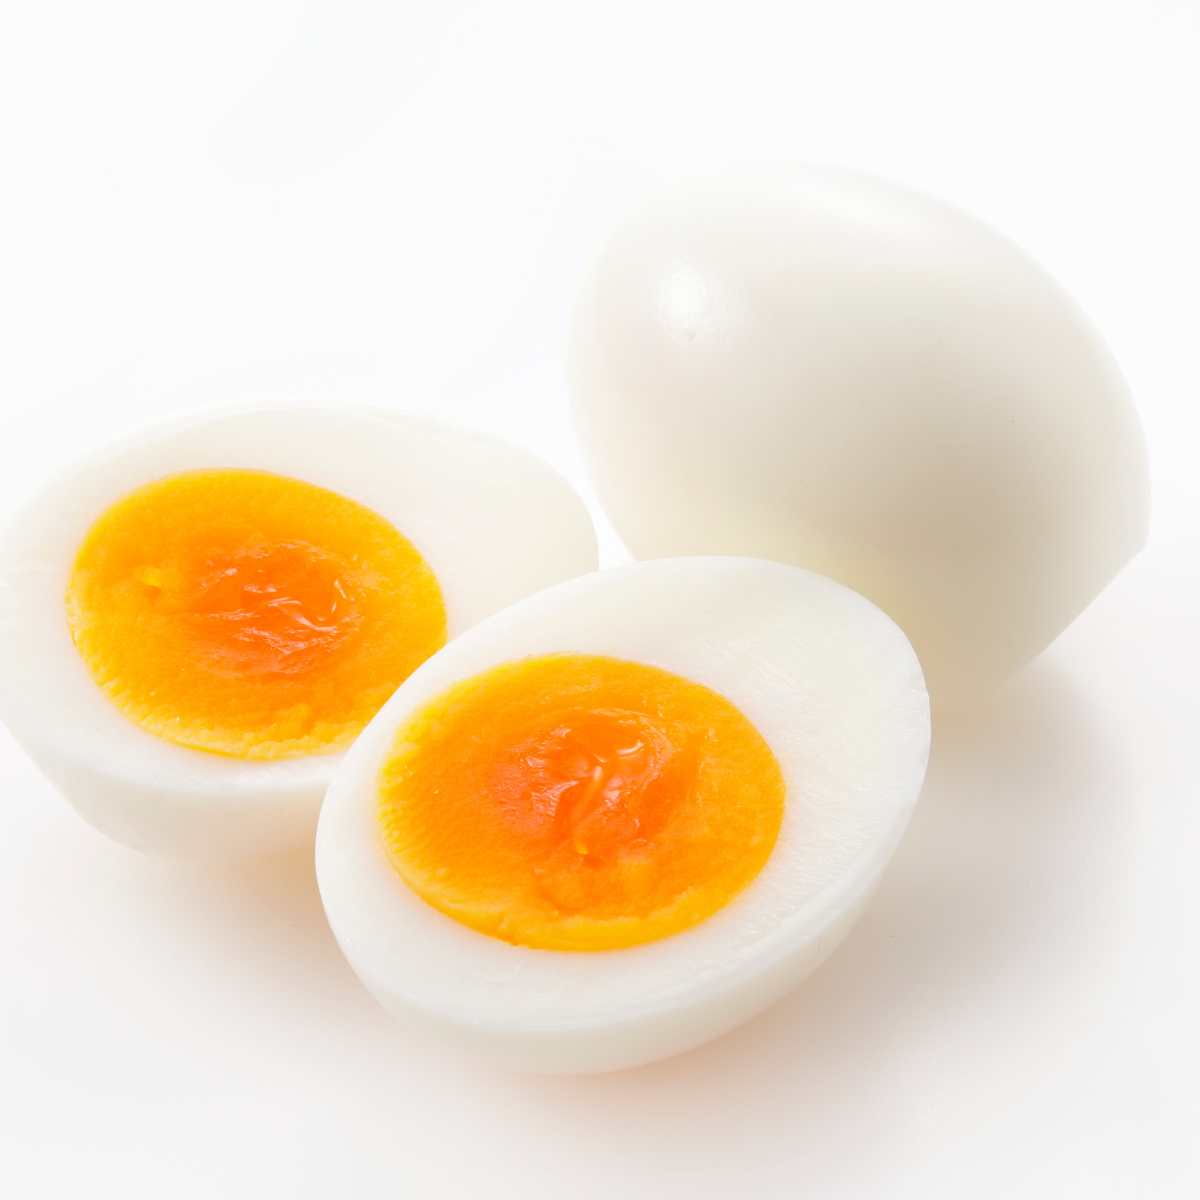 Soft boiled eggs on a white background.